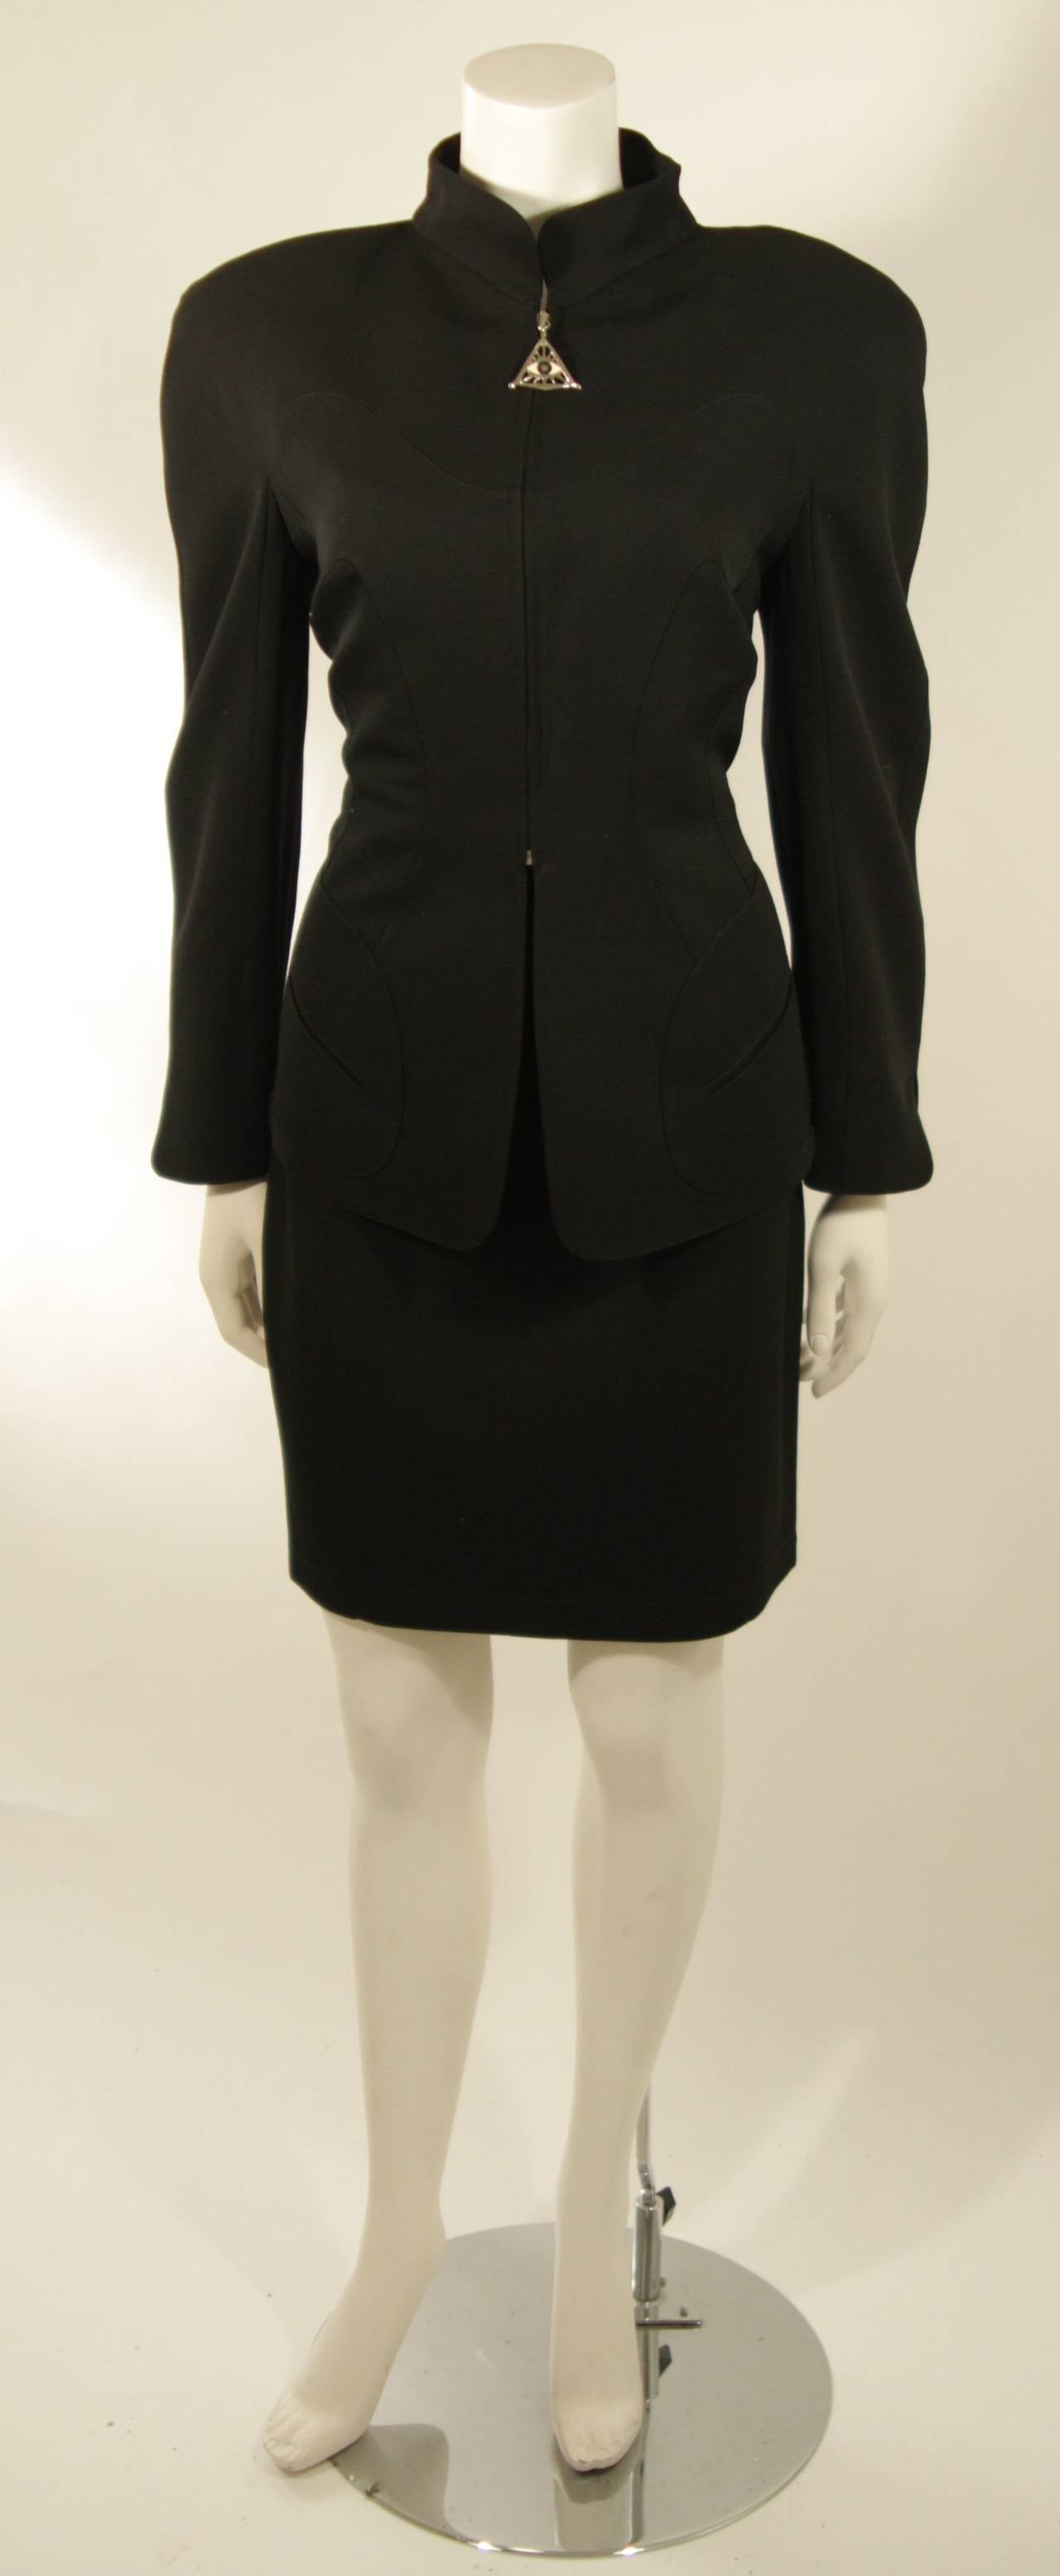 This Thierry Mugler design is available for viewing at our Beverly Hills Boutique. This two piece skirt suit is composed of a black fabric, and features a mandarin style collar which is accented by a 